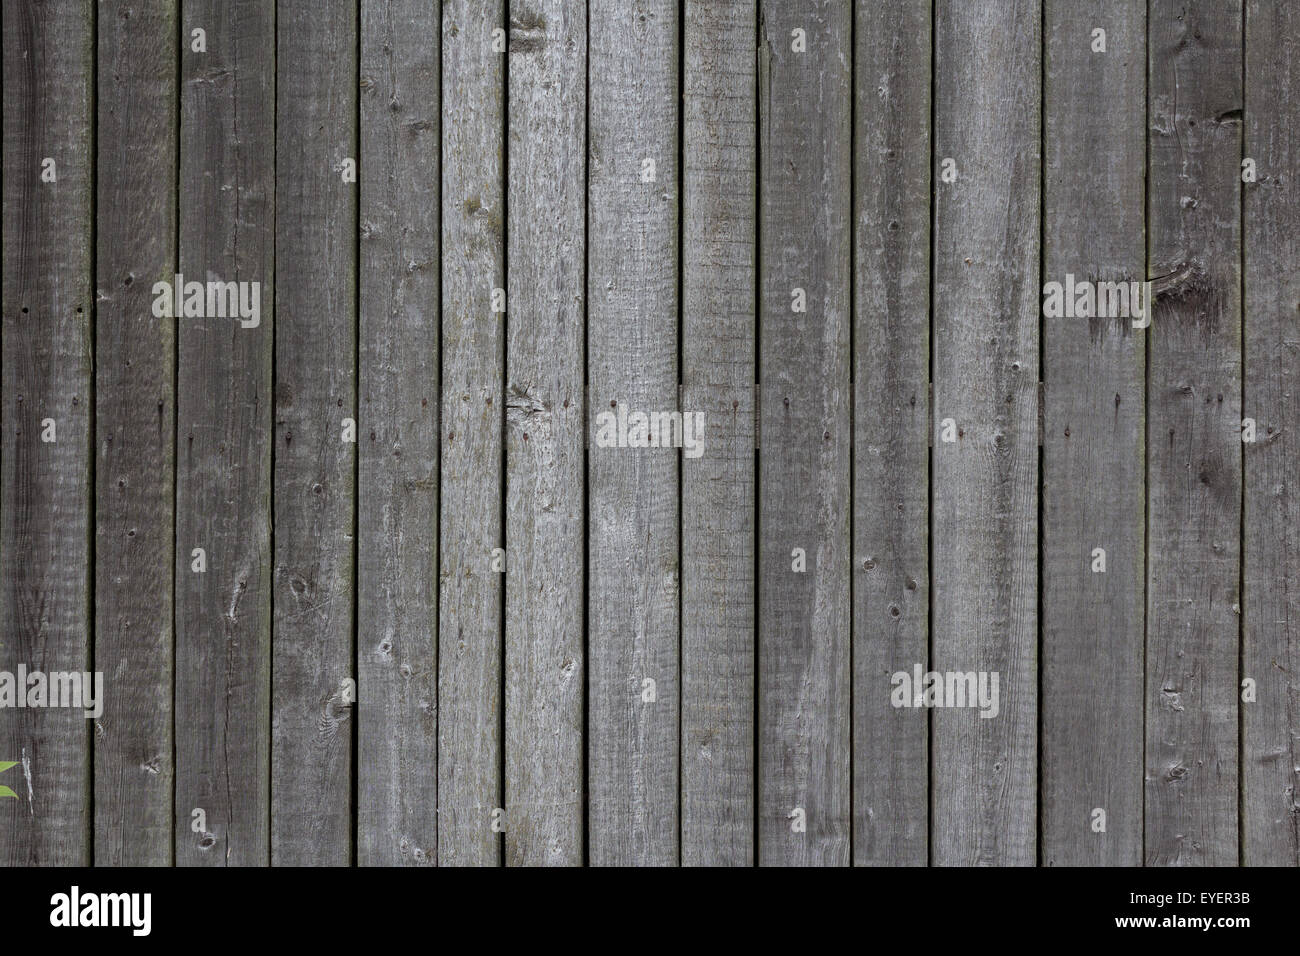 vintage wood background, wooden texture Stock Photo